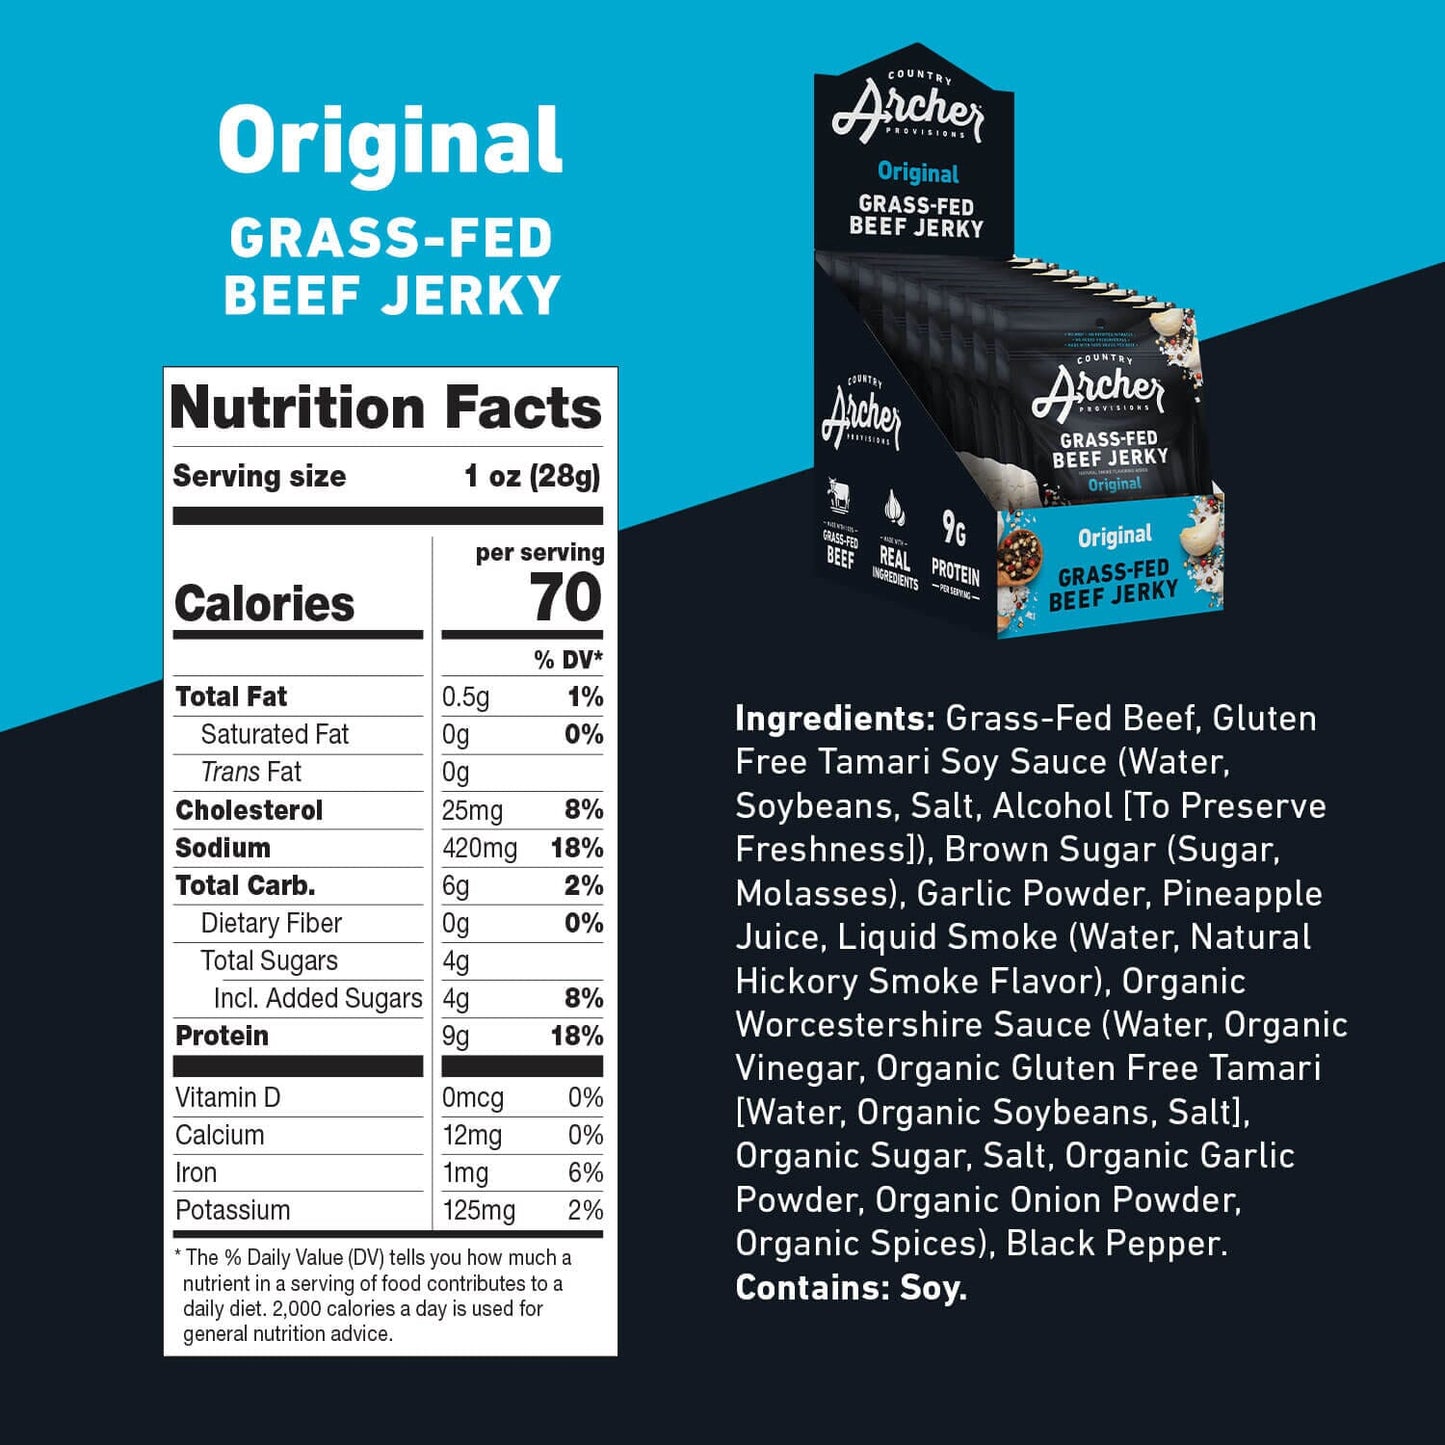 Country Archer Grass-Fed Beef Jerky Original 1 oz package, nutrition facts